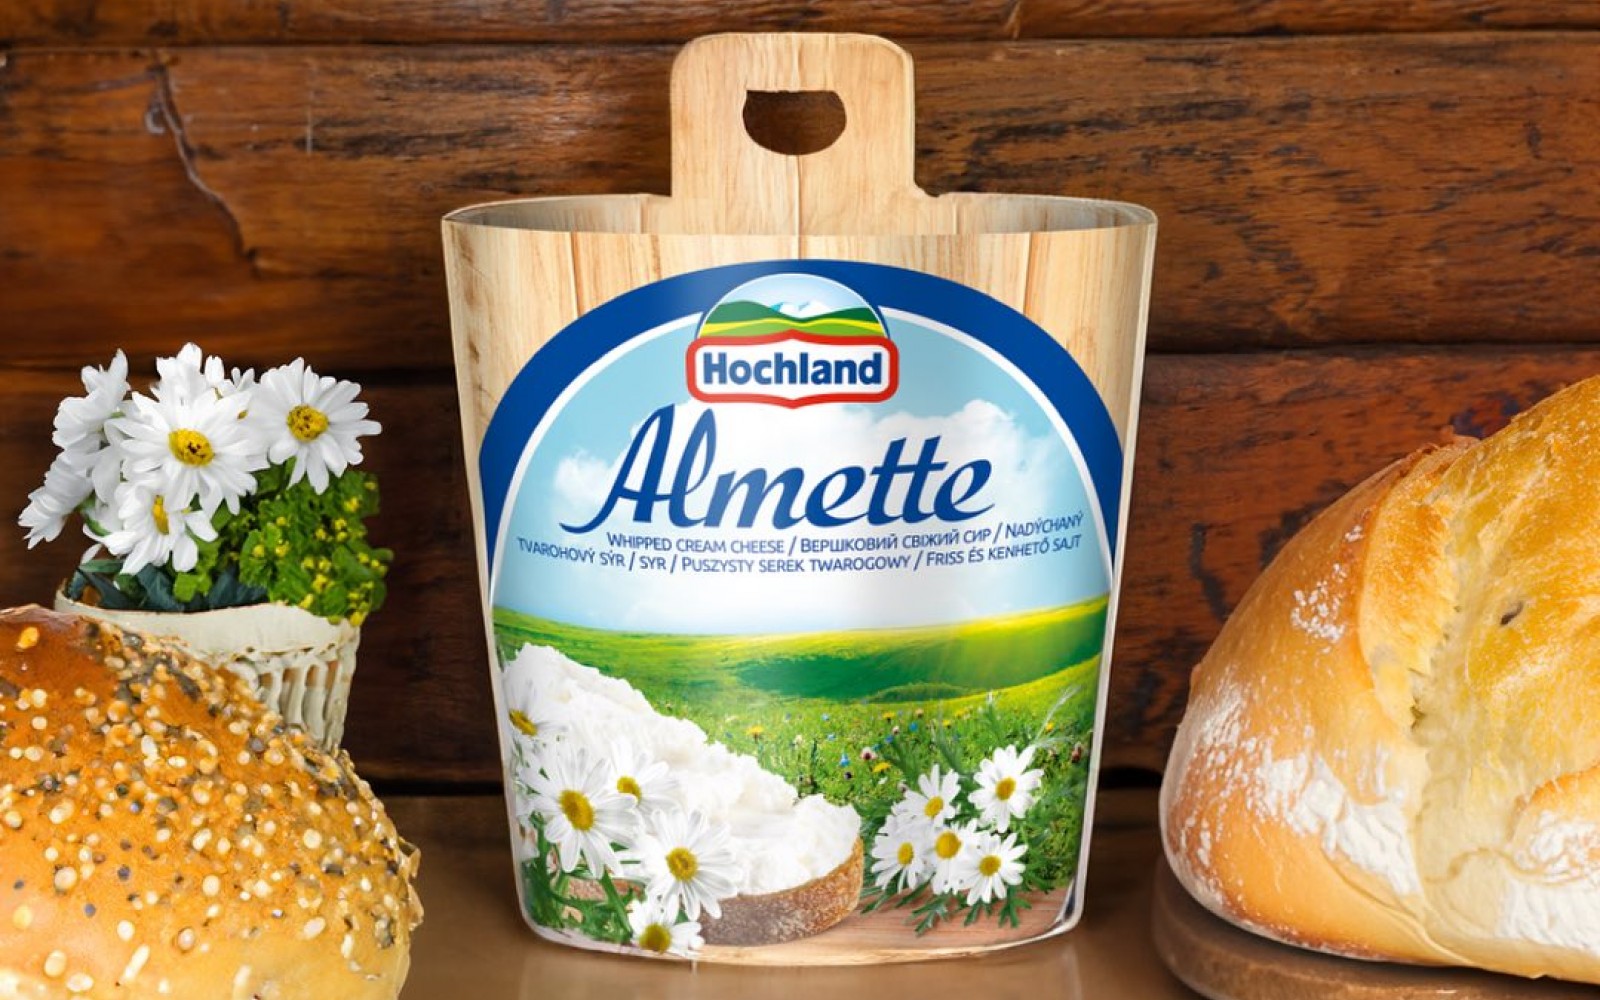 If you are looking for a divinely delicious, easy-to-spread cream cheese, then Almette is the only one!